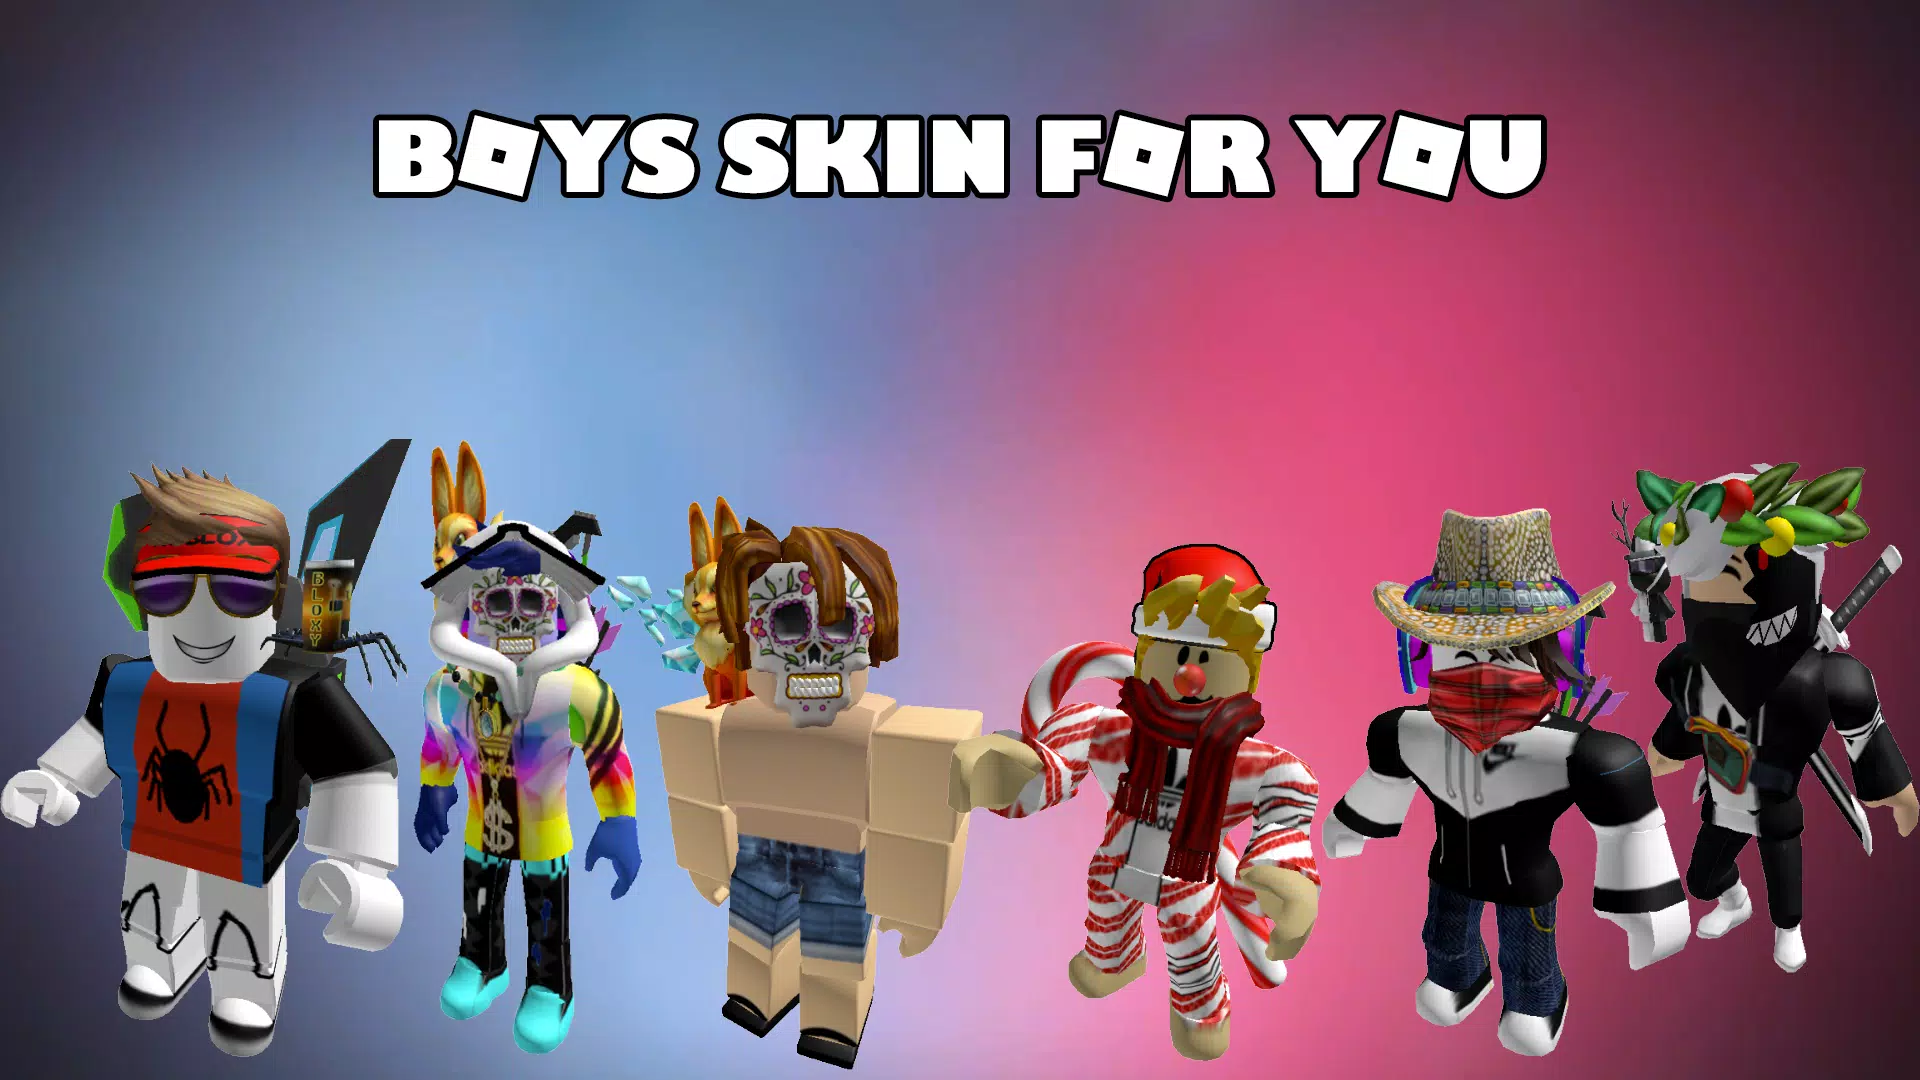 ROBLOX: Master Skins Wallpaper on the App Store